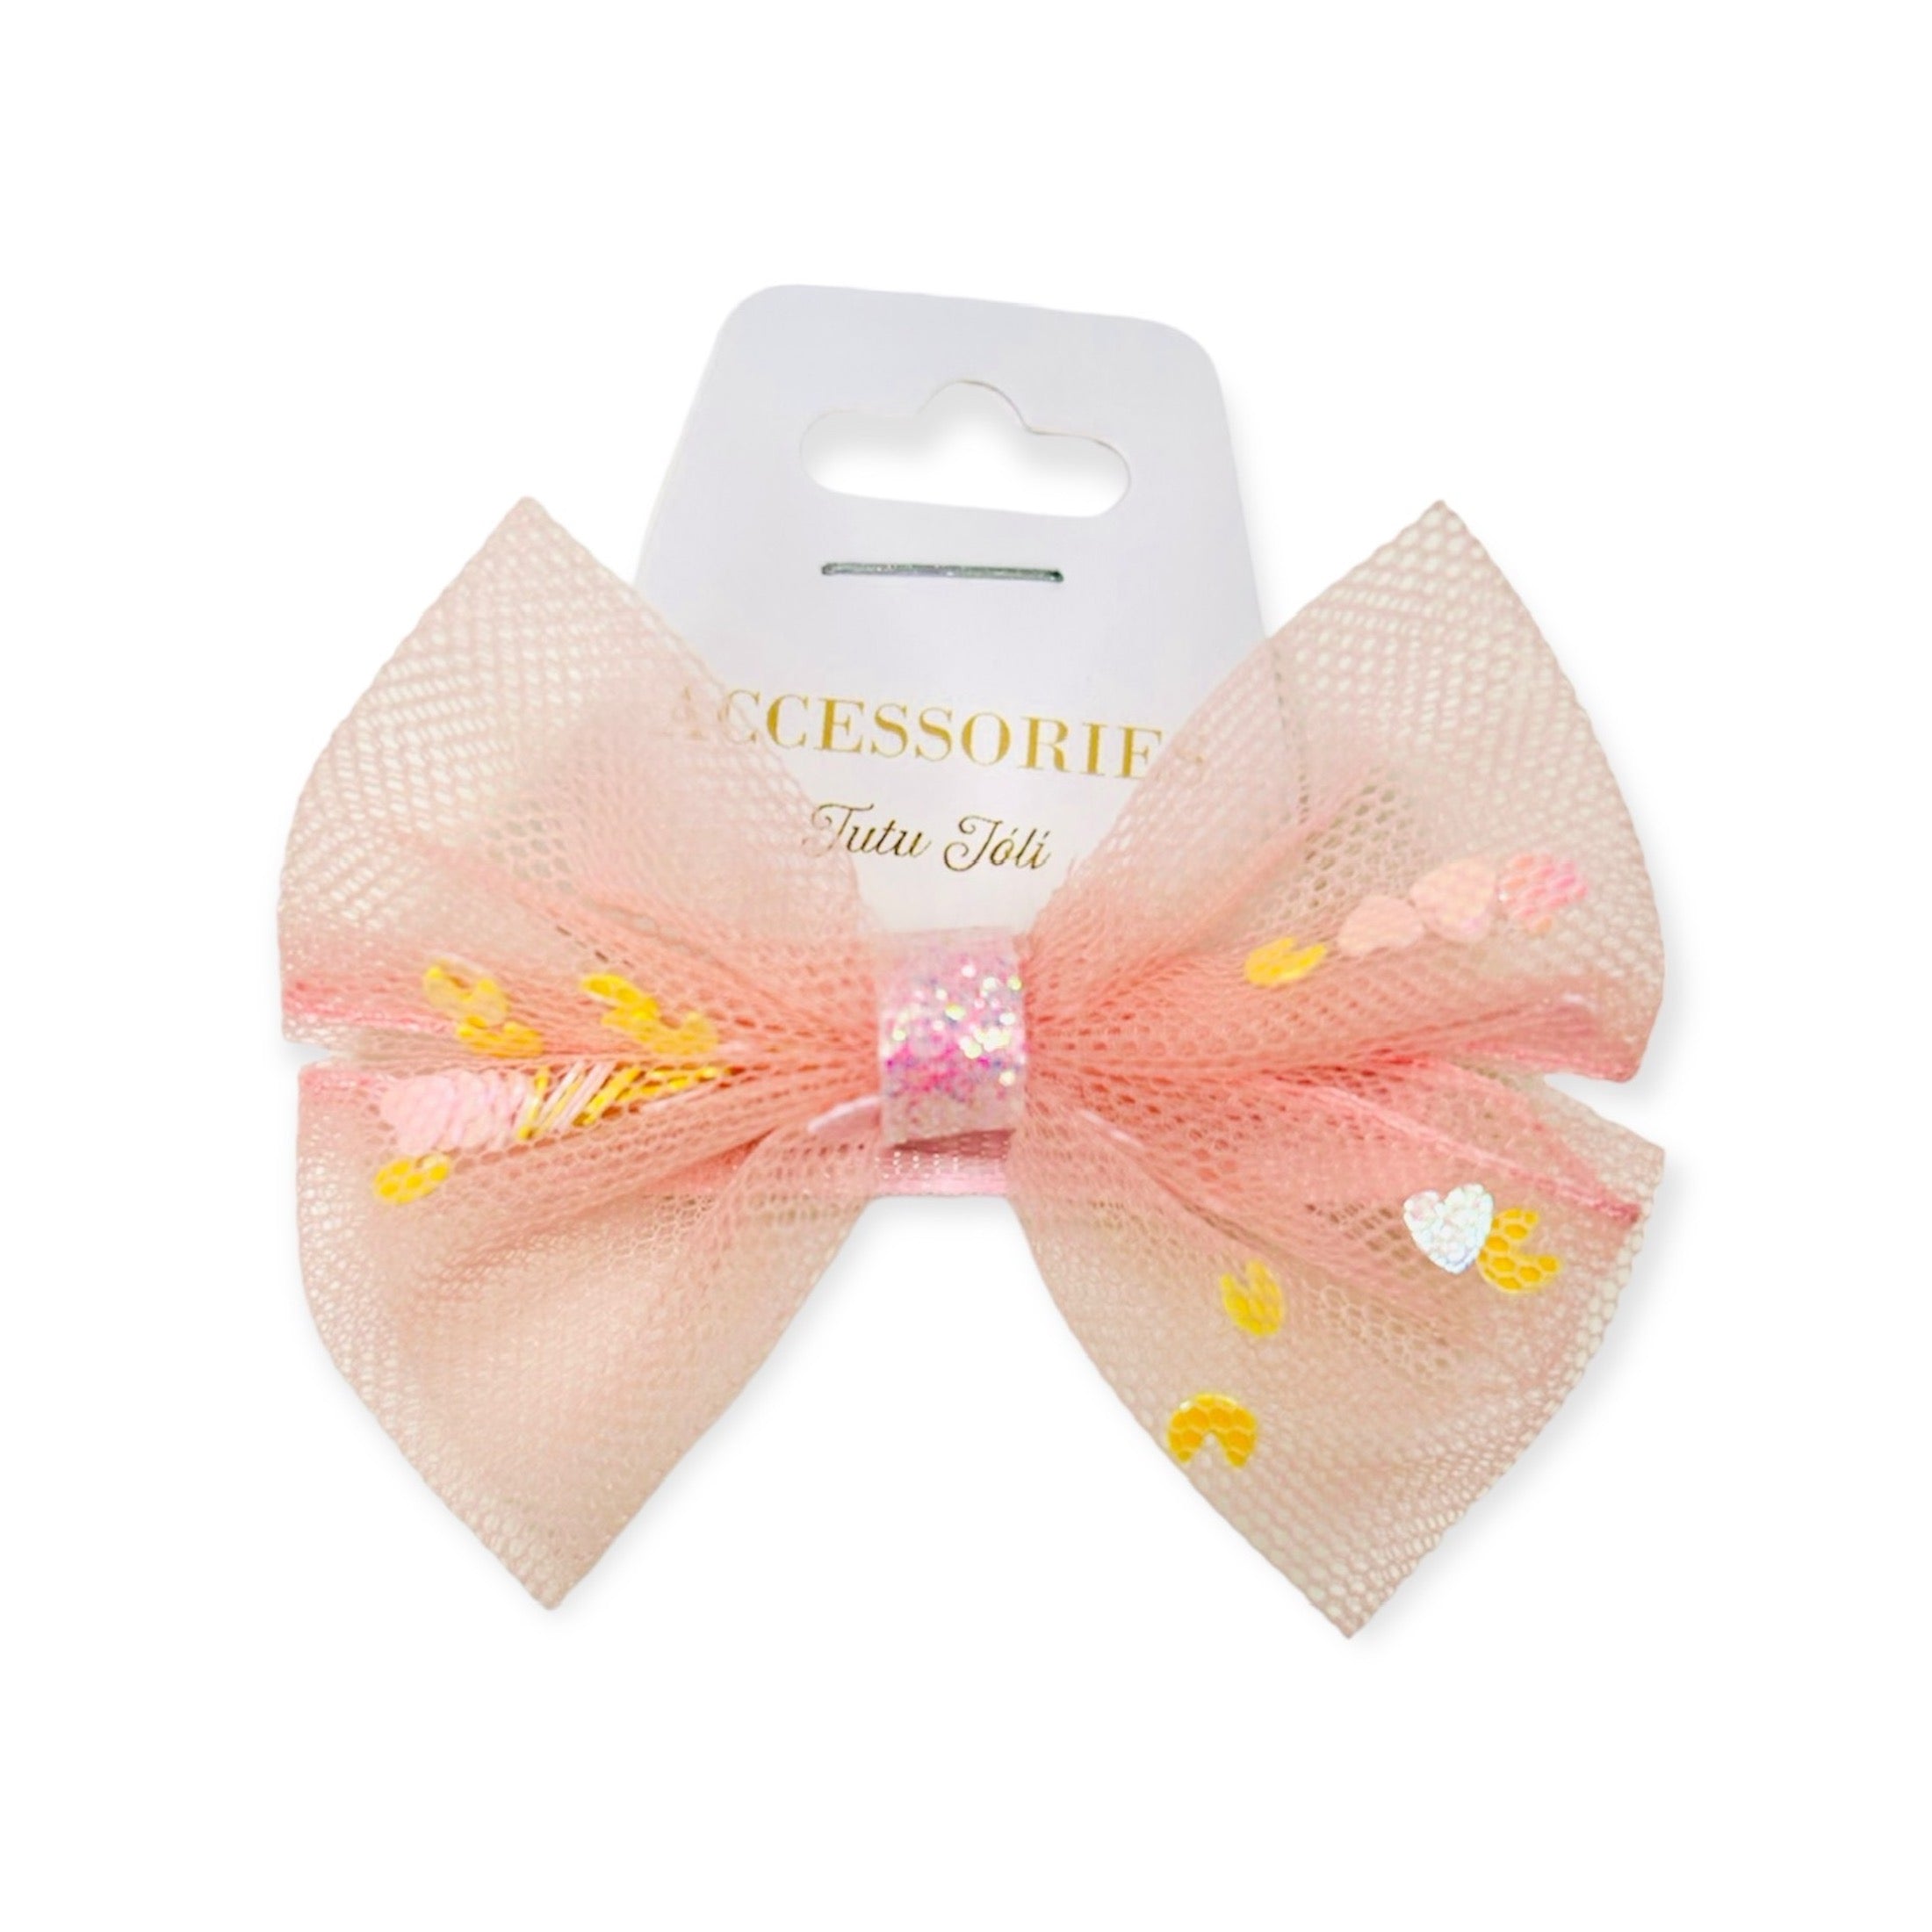 baby bows. toddler bows. toddler hair bows. baby hair clips. baby clips. peach bow clip. dusty rose bows. pink bows girl. baby hair accessory. toddler hair clips. blush bow hair clip for baby girl.